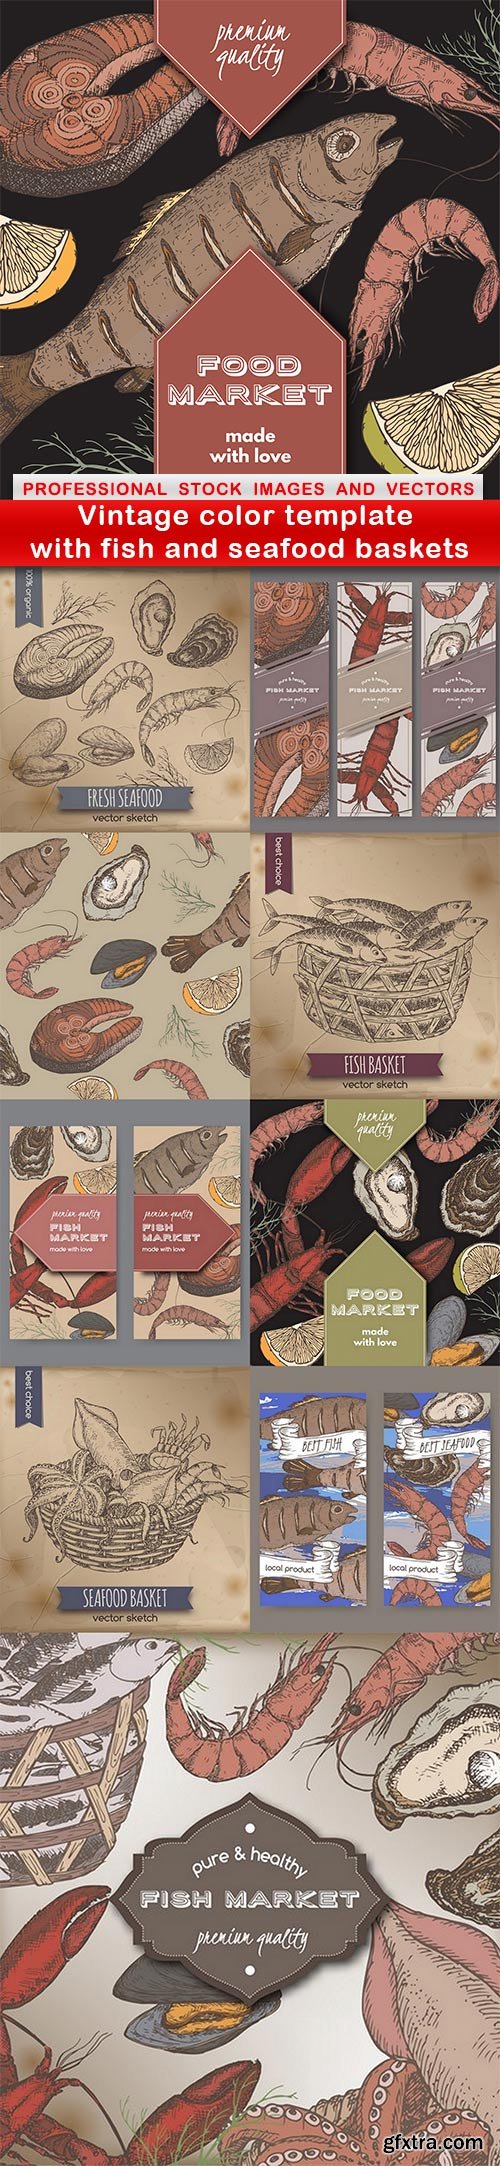 Vintage color template with fish and seafood baskets - 10 EPS